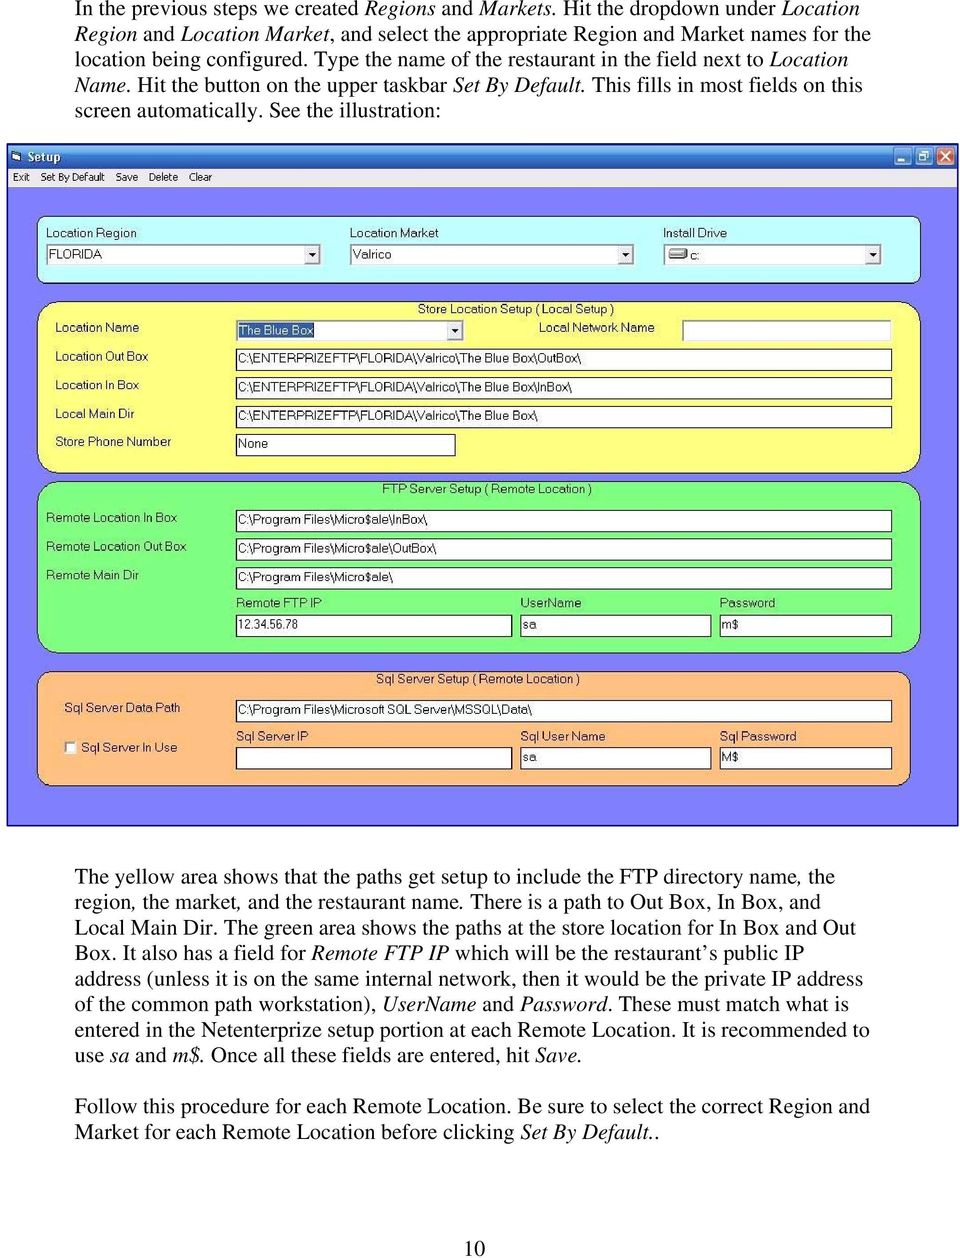 See the illustration: The yellow area shows that the paths get setup to include the FTP directory name, the region, the market, and the restaurant name.